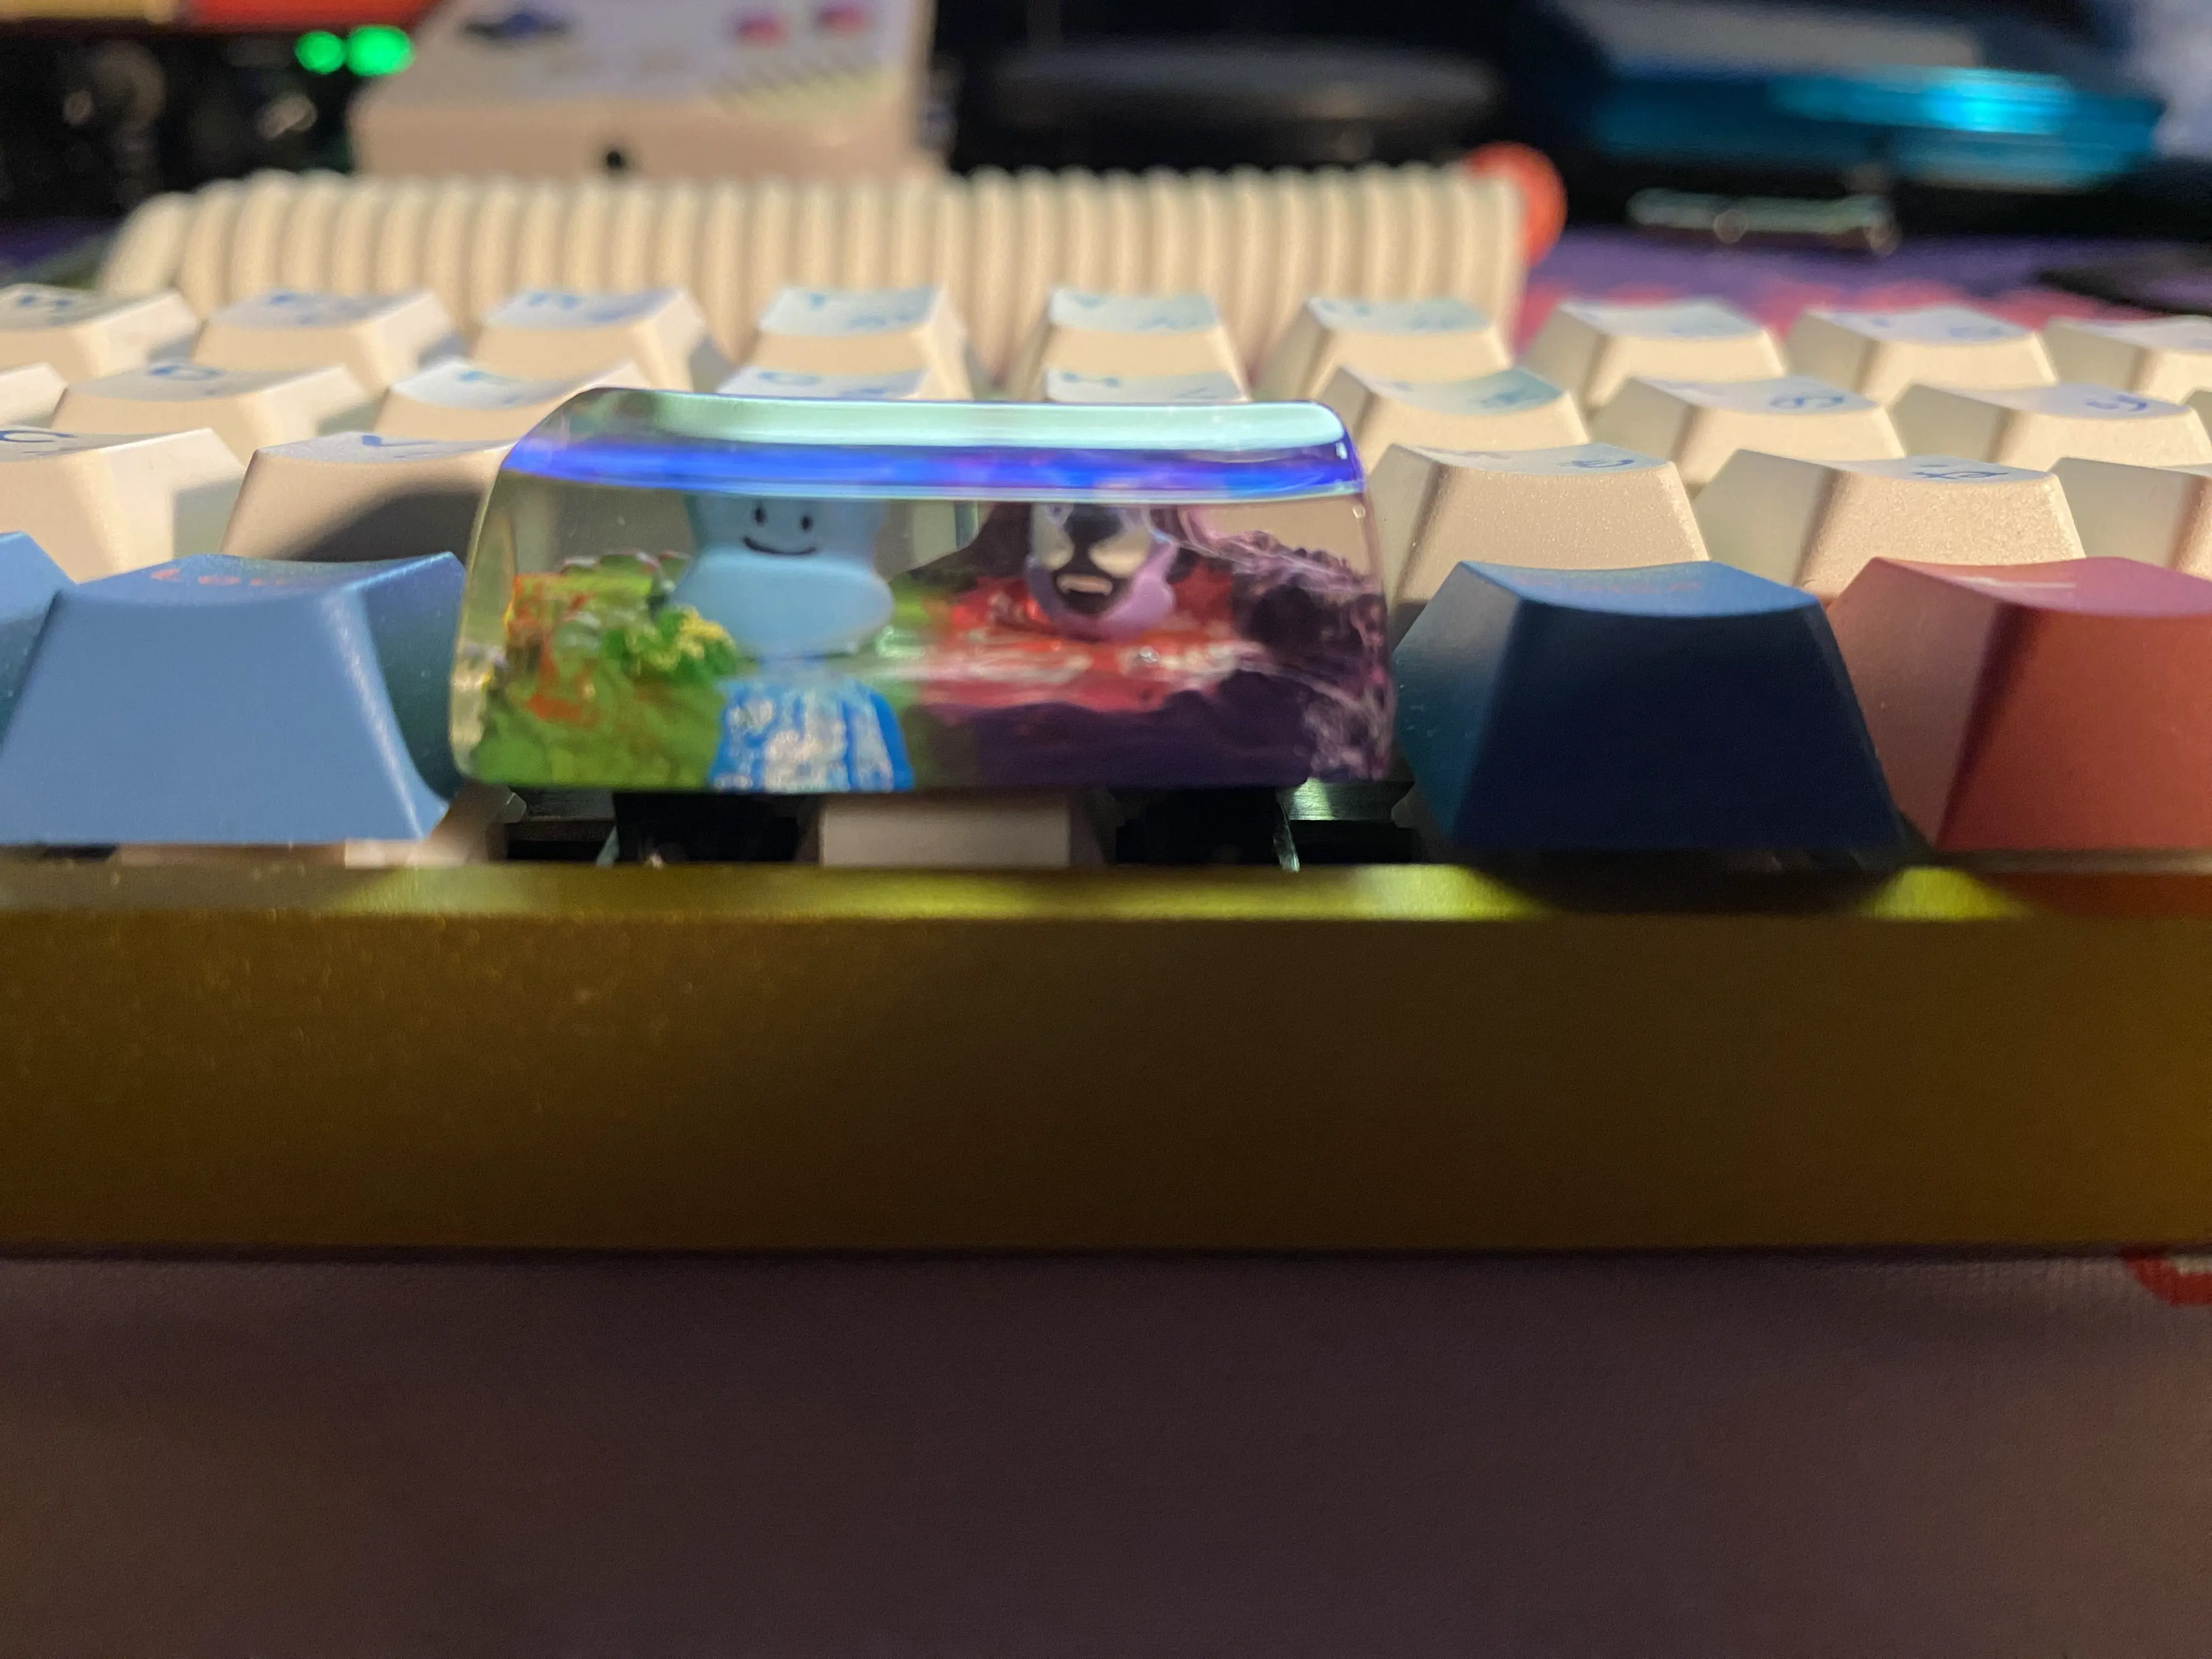 a front picture of the pokemon spacebar on the keyboard